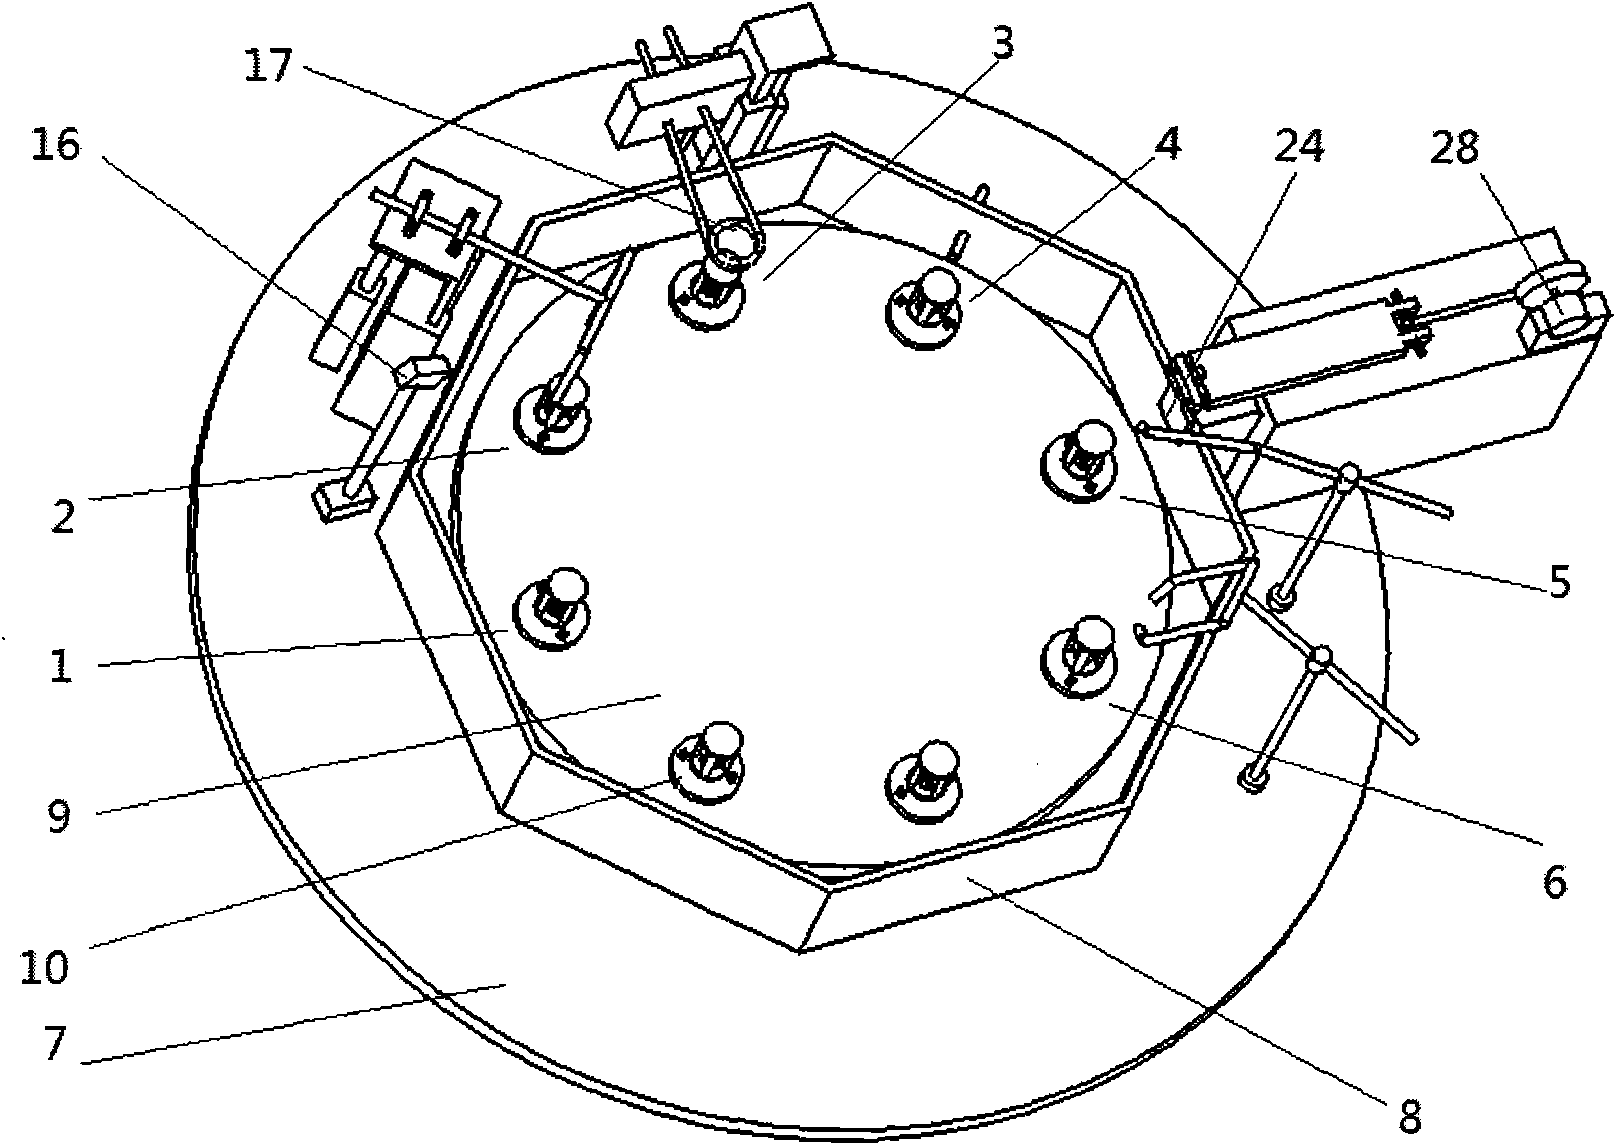 Multi-station welding device and method for auto expansion valve